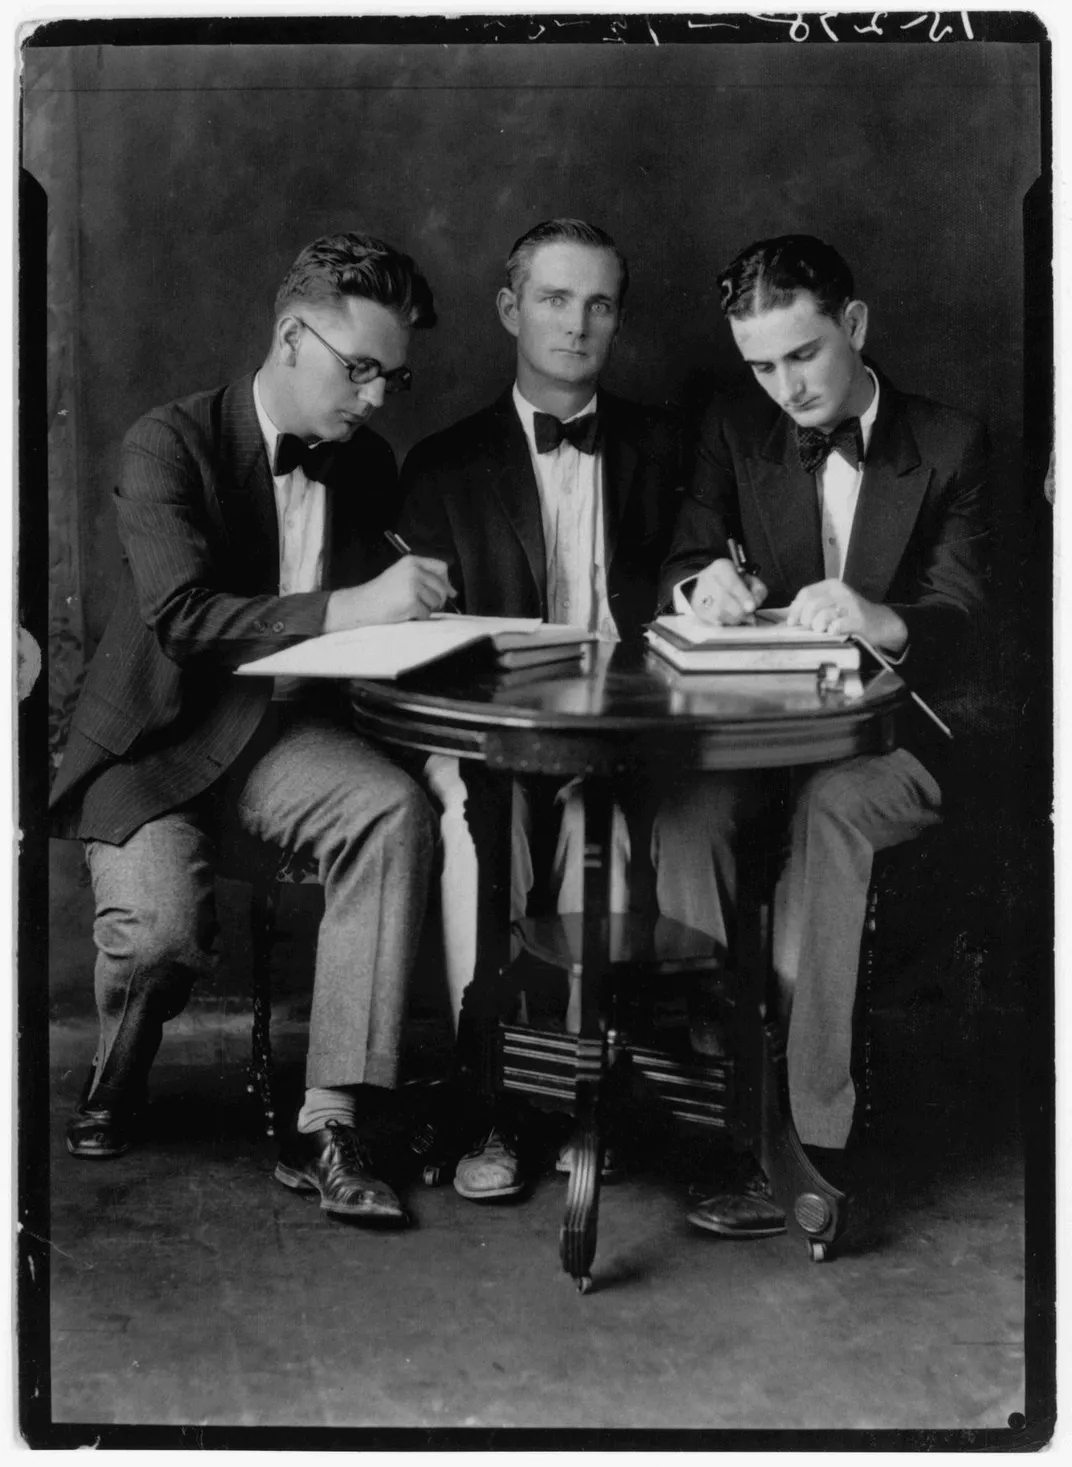 A young Johnson, then a student at Southwest Texas State Teachers College, appears at right in this 1928 photo